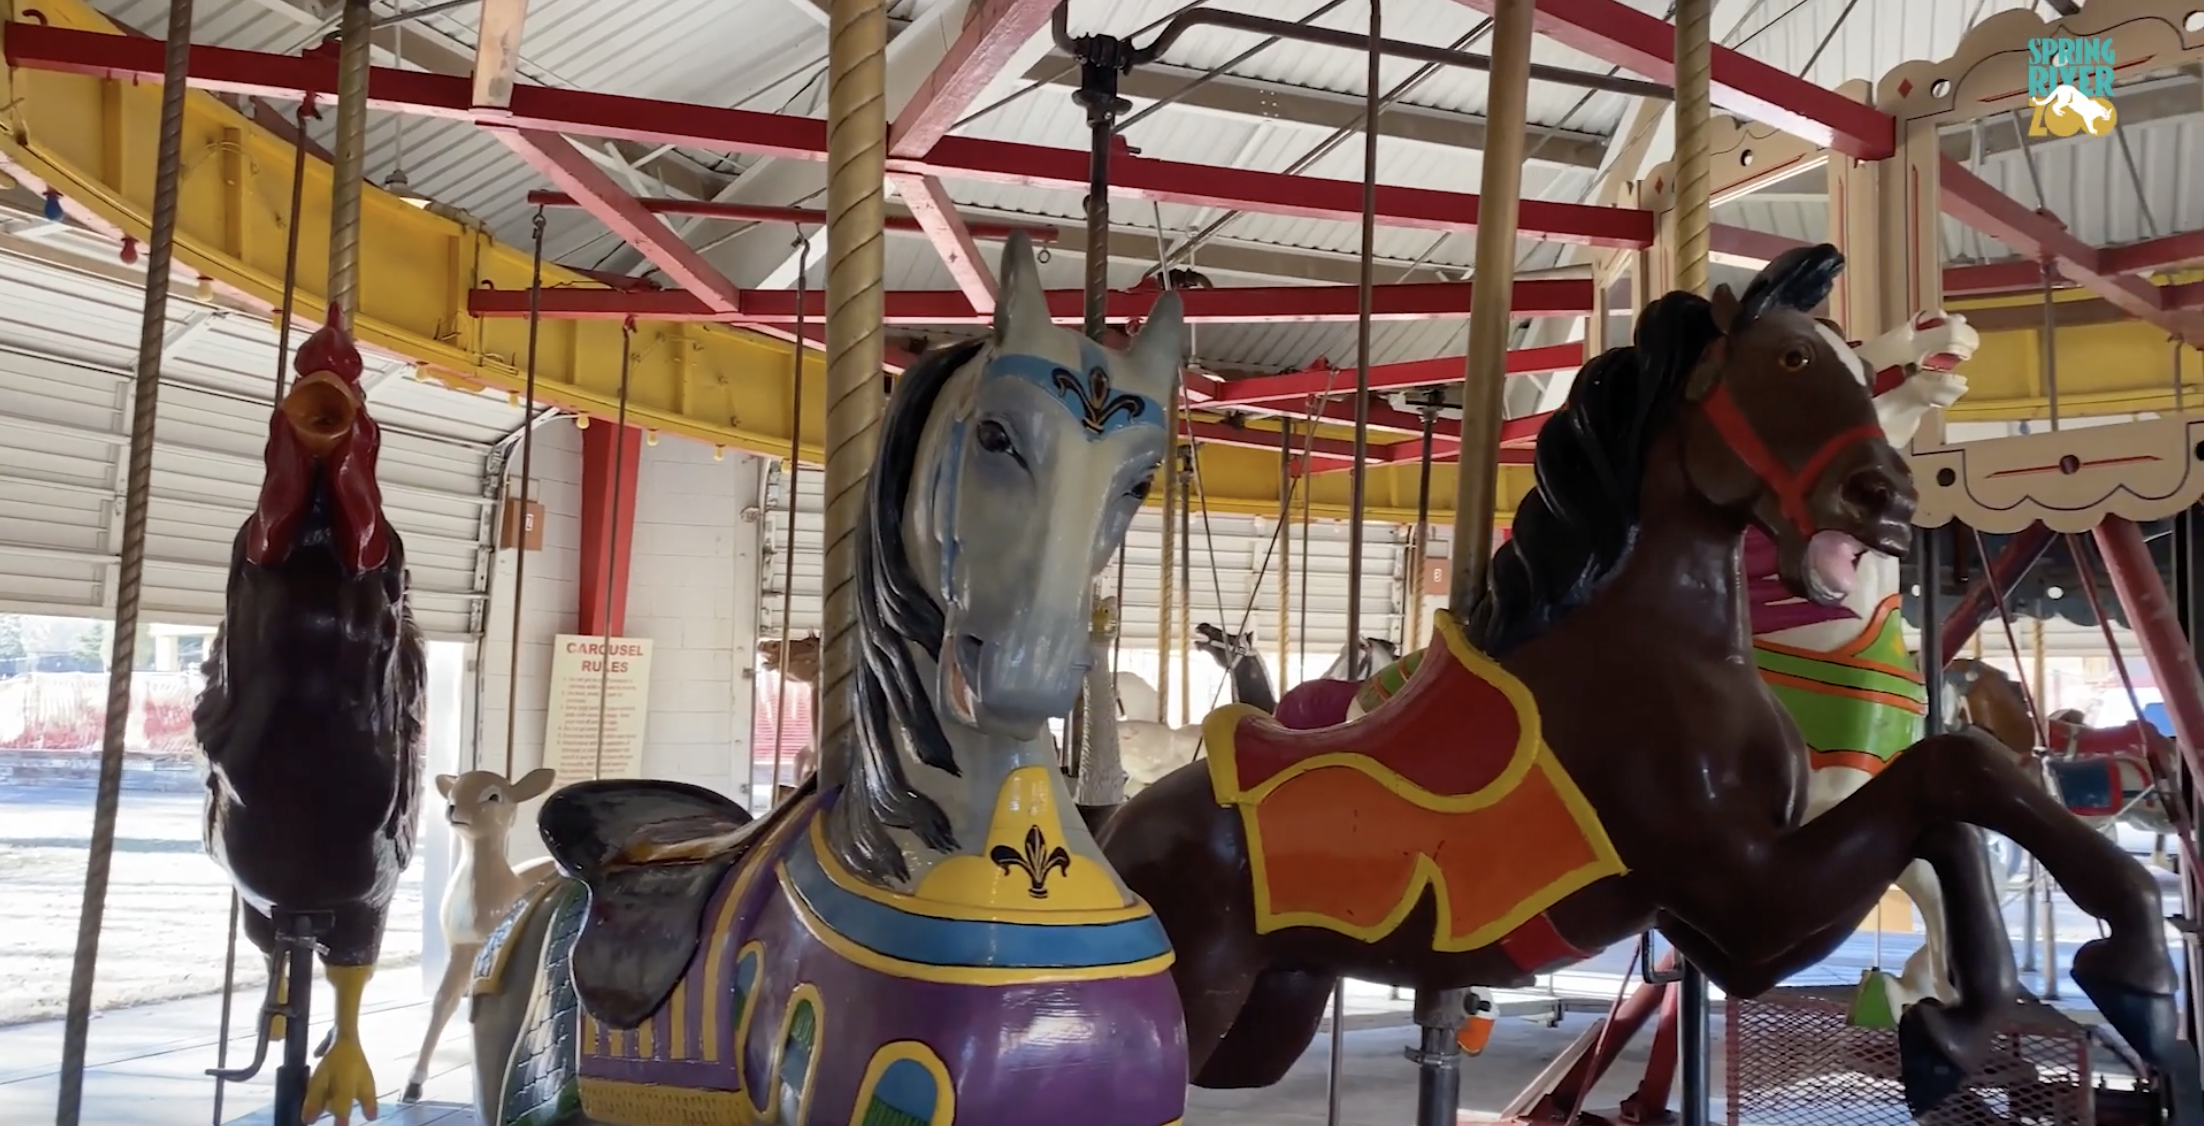 An image of the Roswell Carousel at the Spring River Zoo in Roswell, NM. There are two leaping horses, a chicken, and a deer.